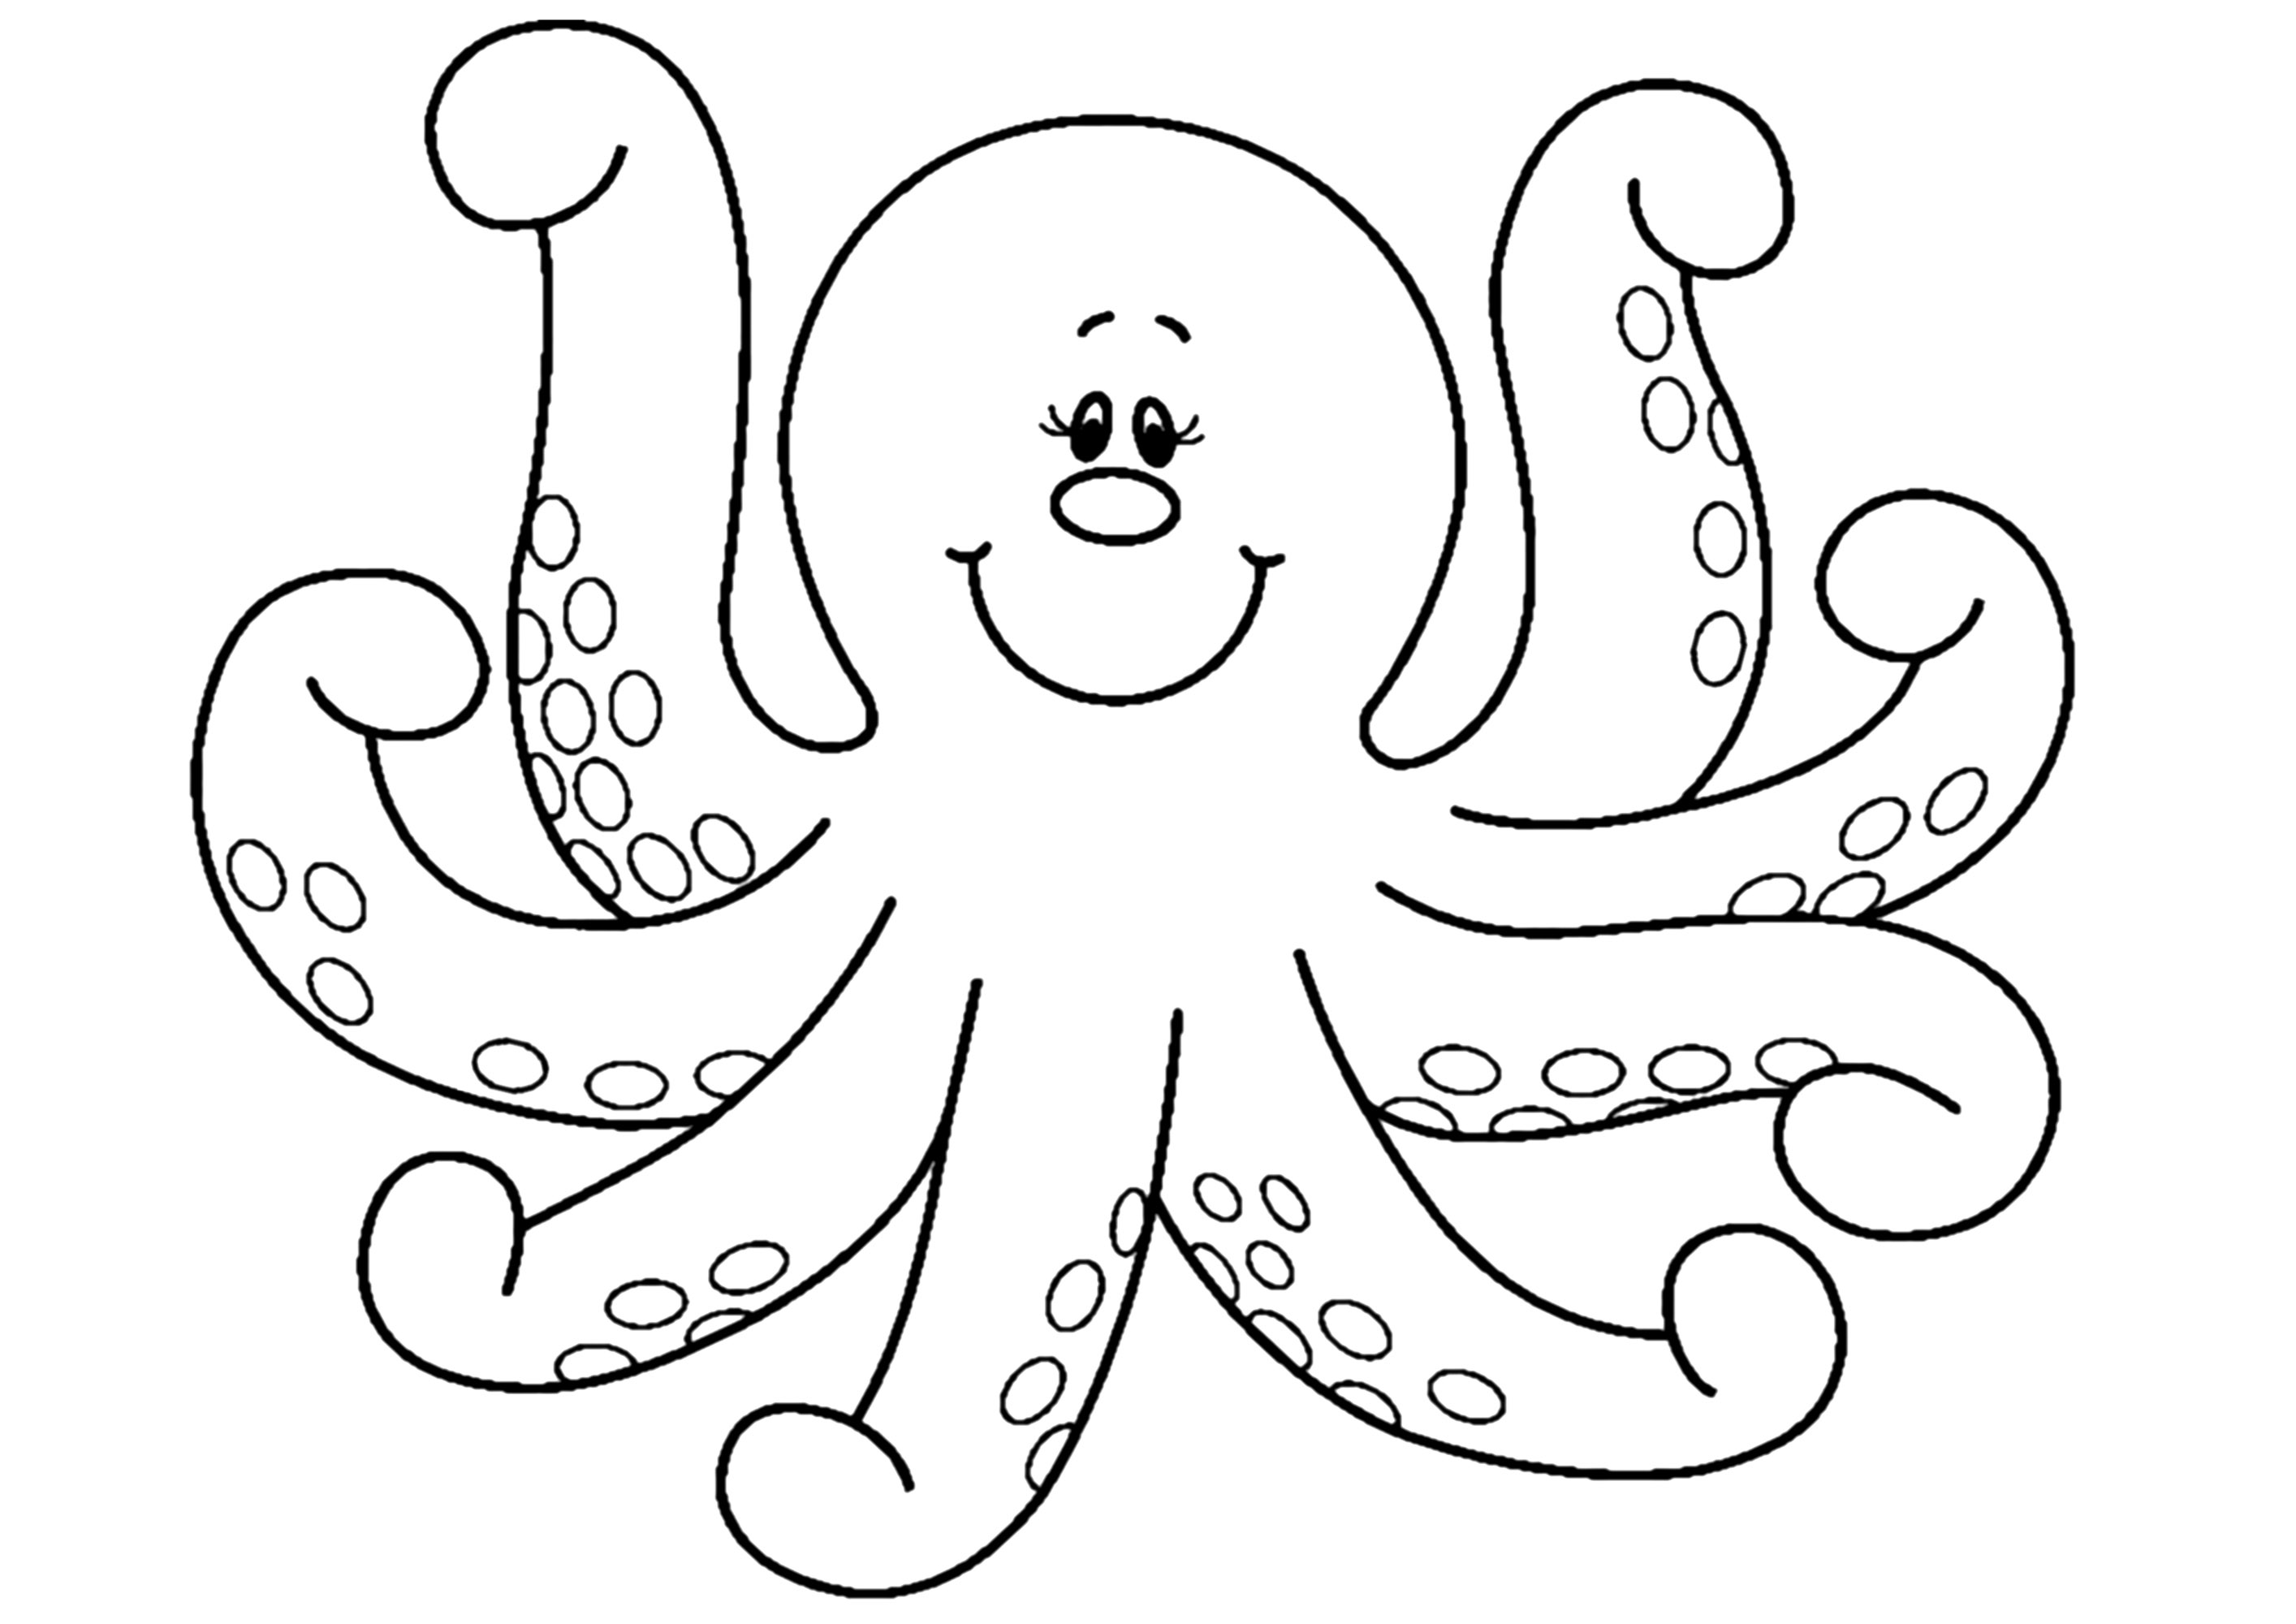 Free Octopuses coloring page to download, for children